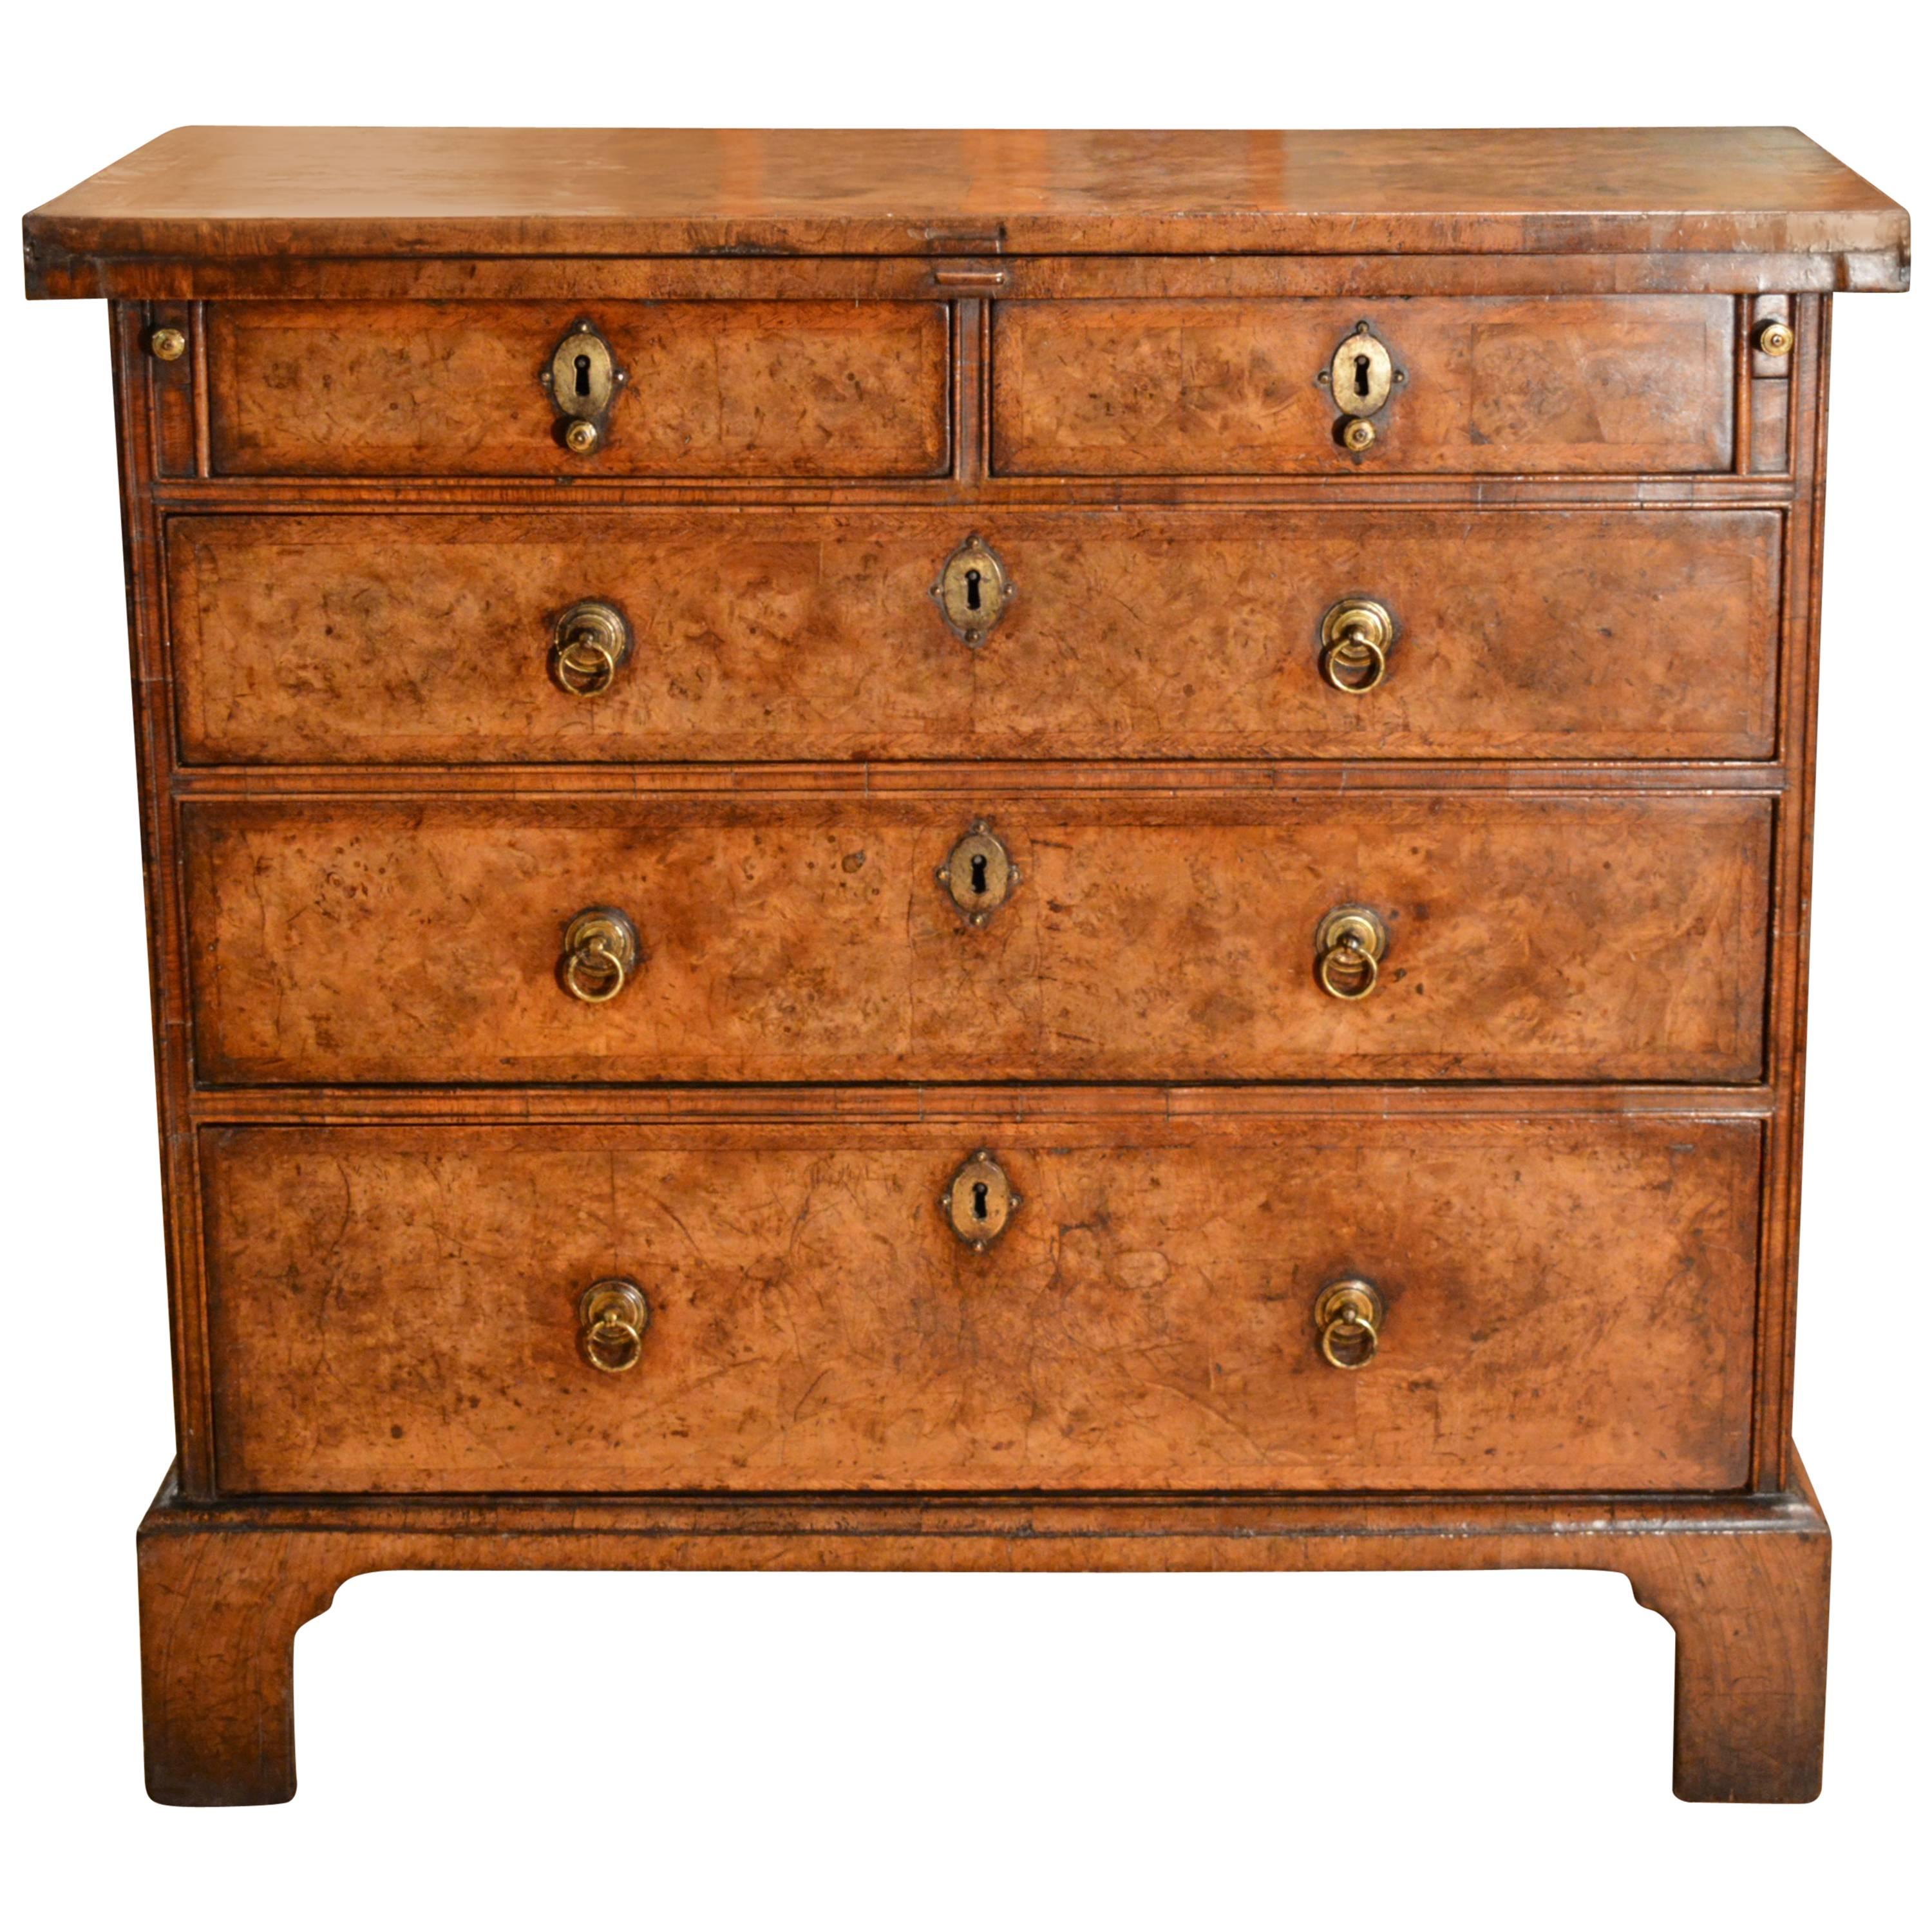 Early 18th Century Walnut Bachelors Chest For Sale